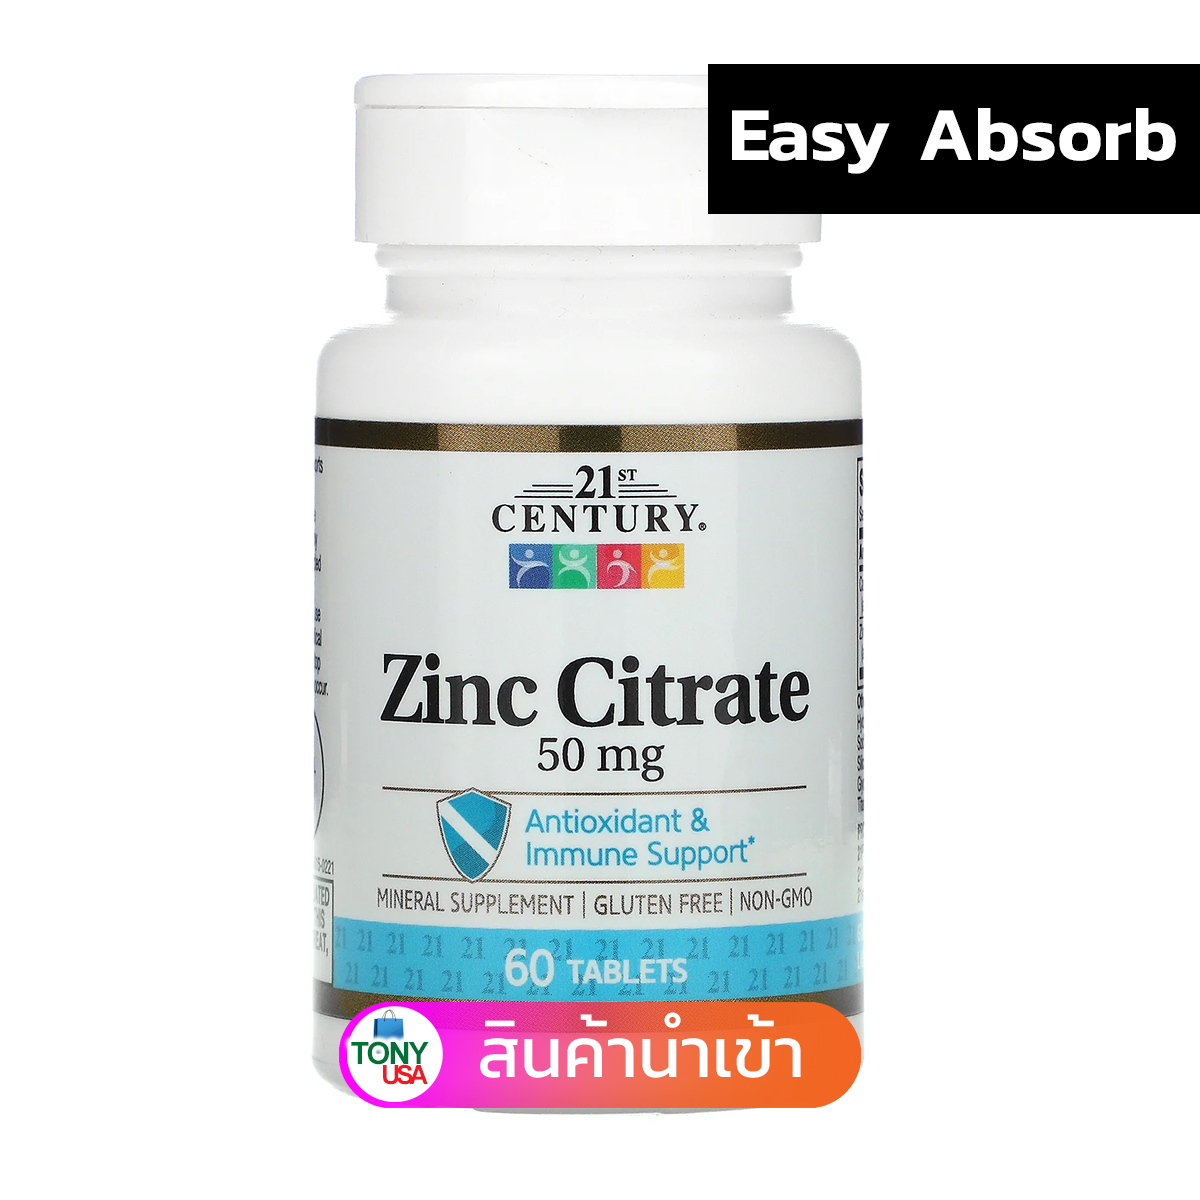 21st Century, Zinc Citrate, 50 mg, 60 Tablets Easy Absorb